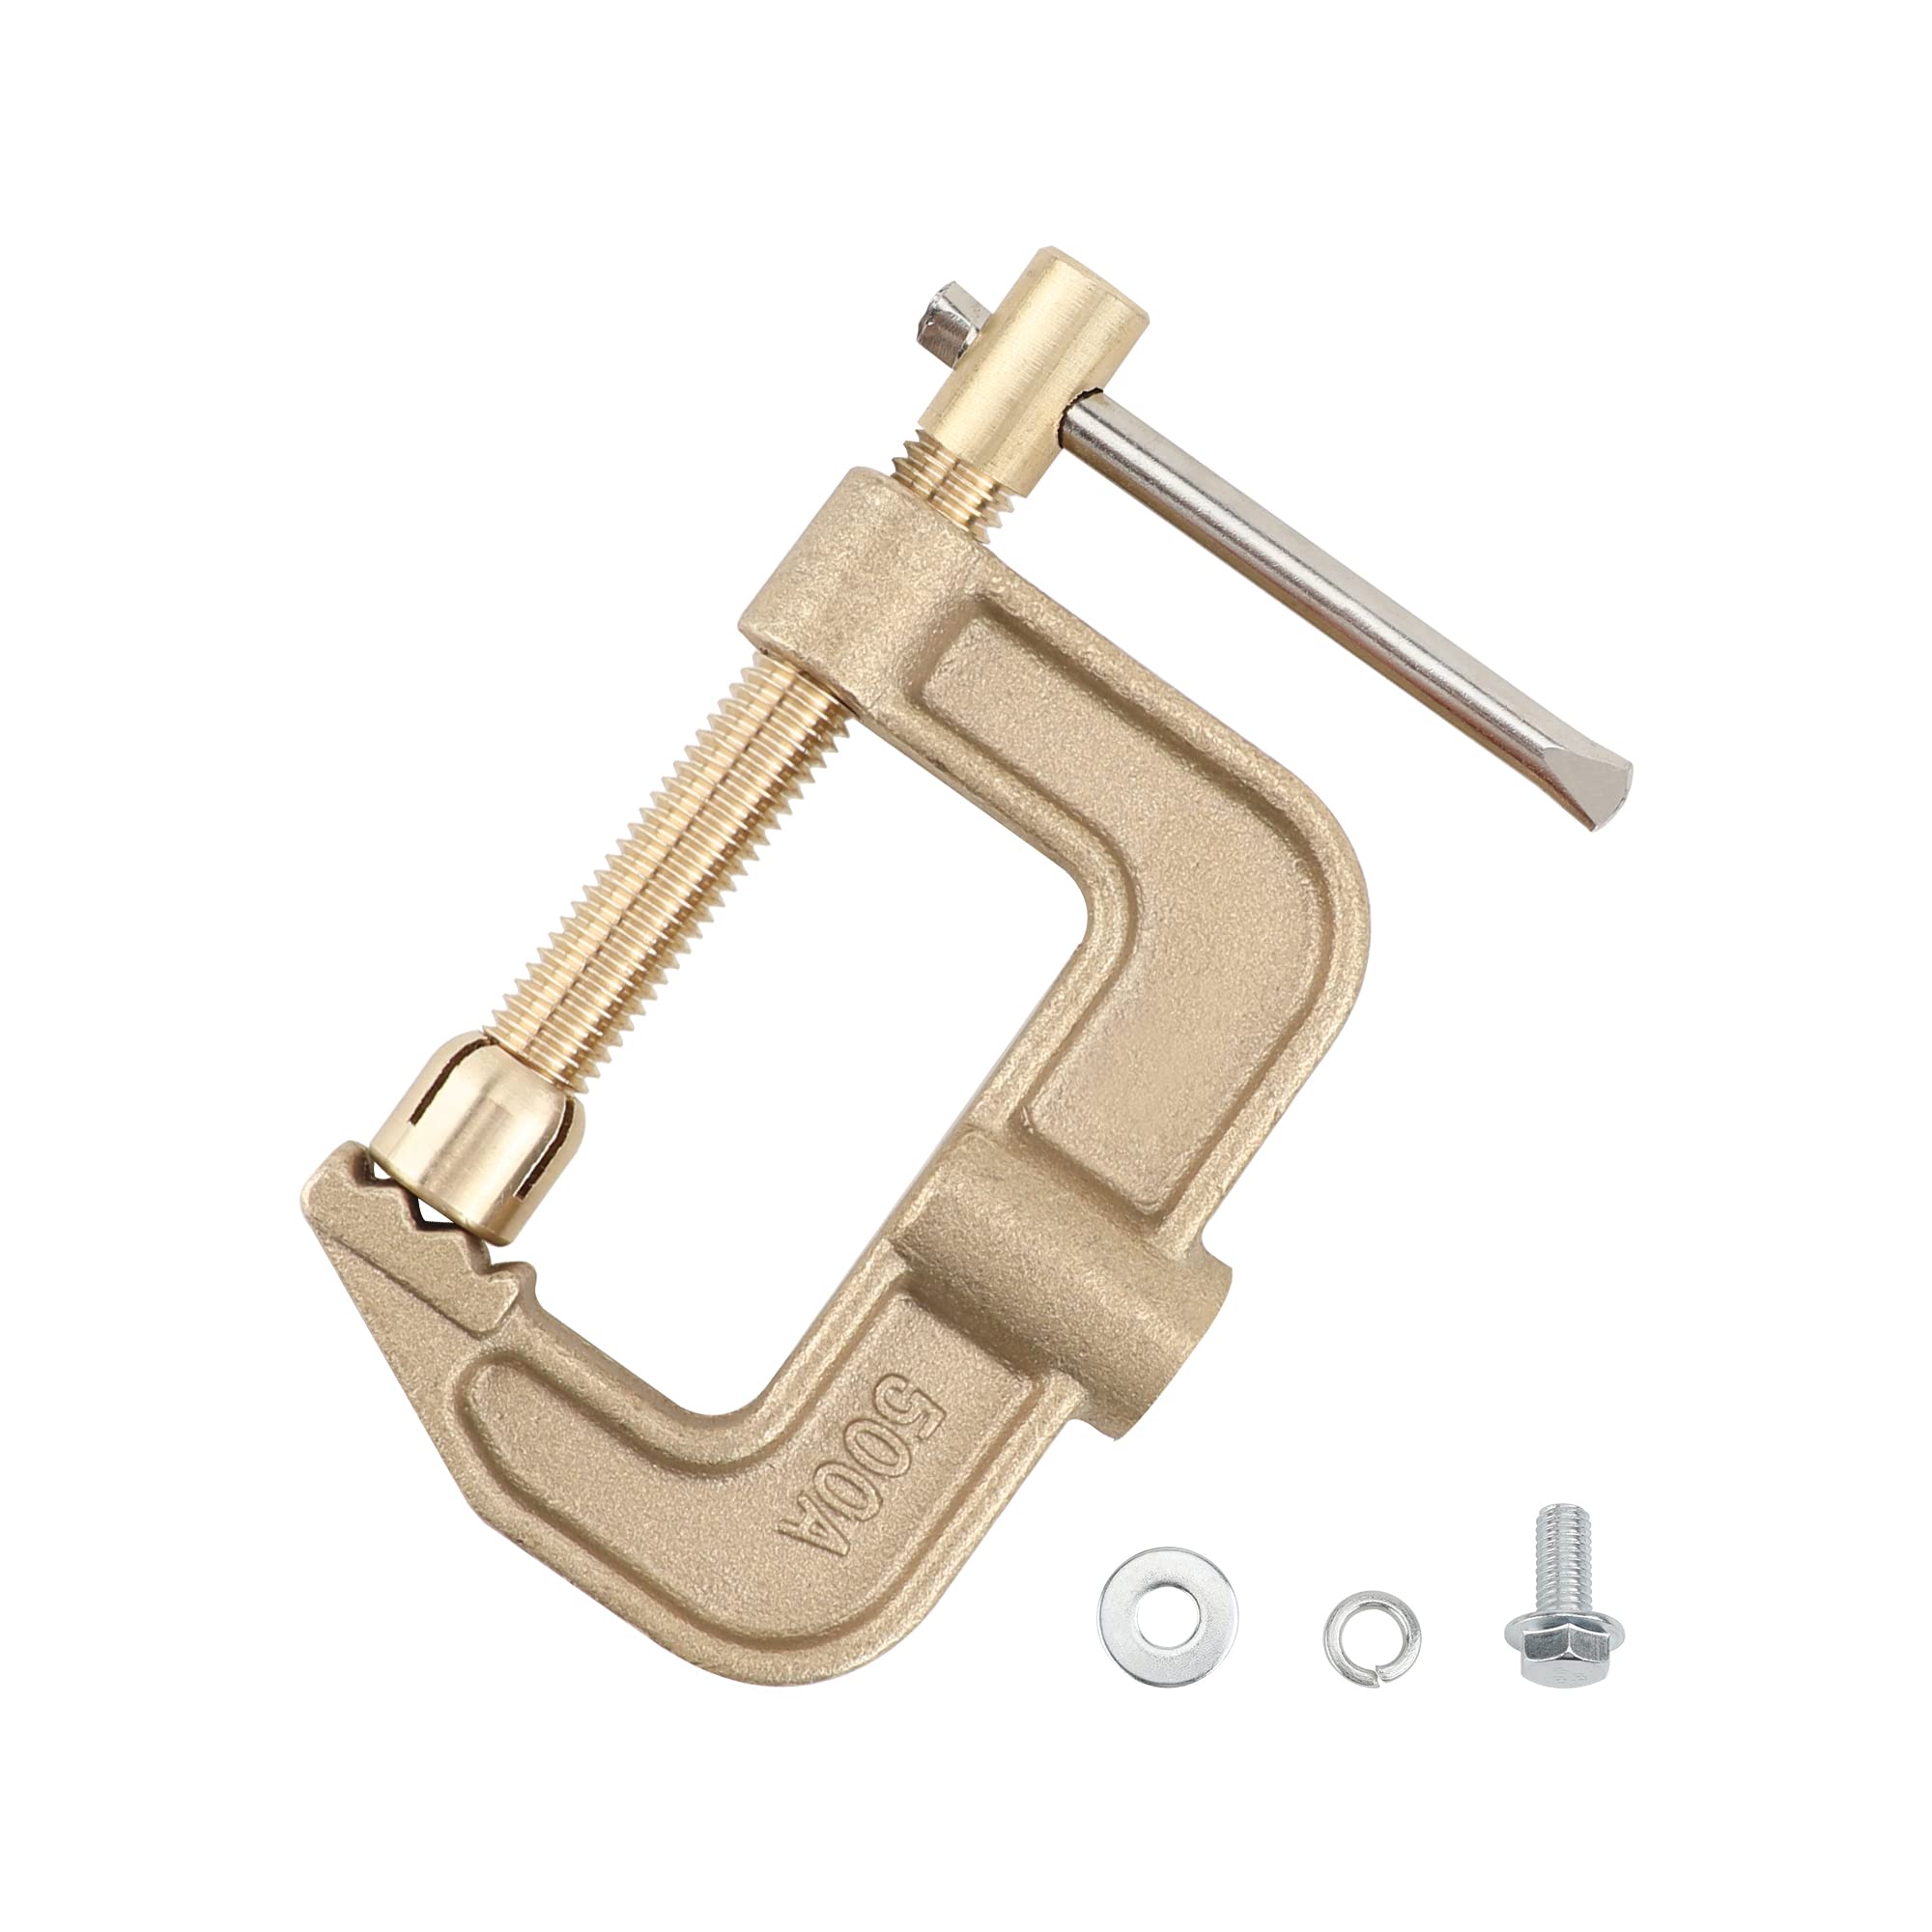 hynade Welding Ground Clamp 500A G Shape Brass Ground Earth Clamp for Tig Mig MMA Welder, Clamping Range up to 43mm